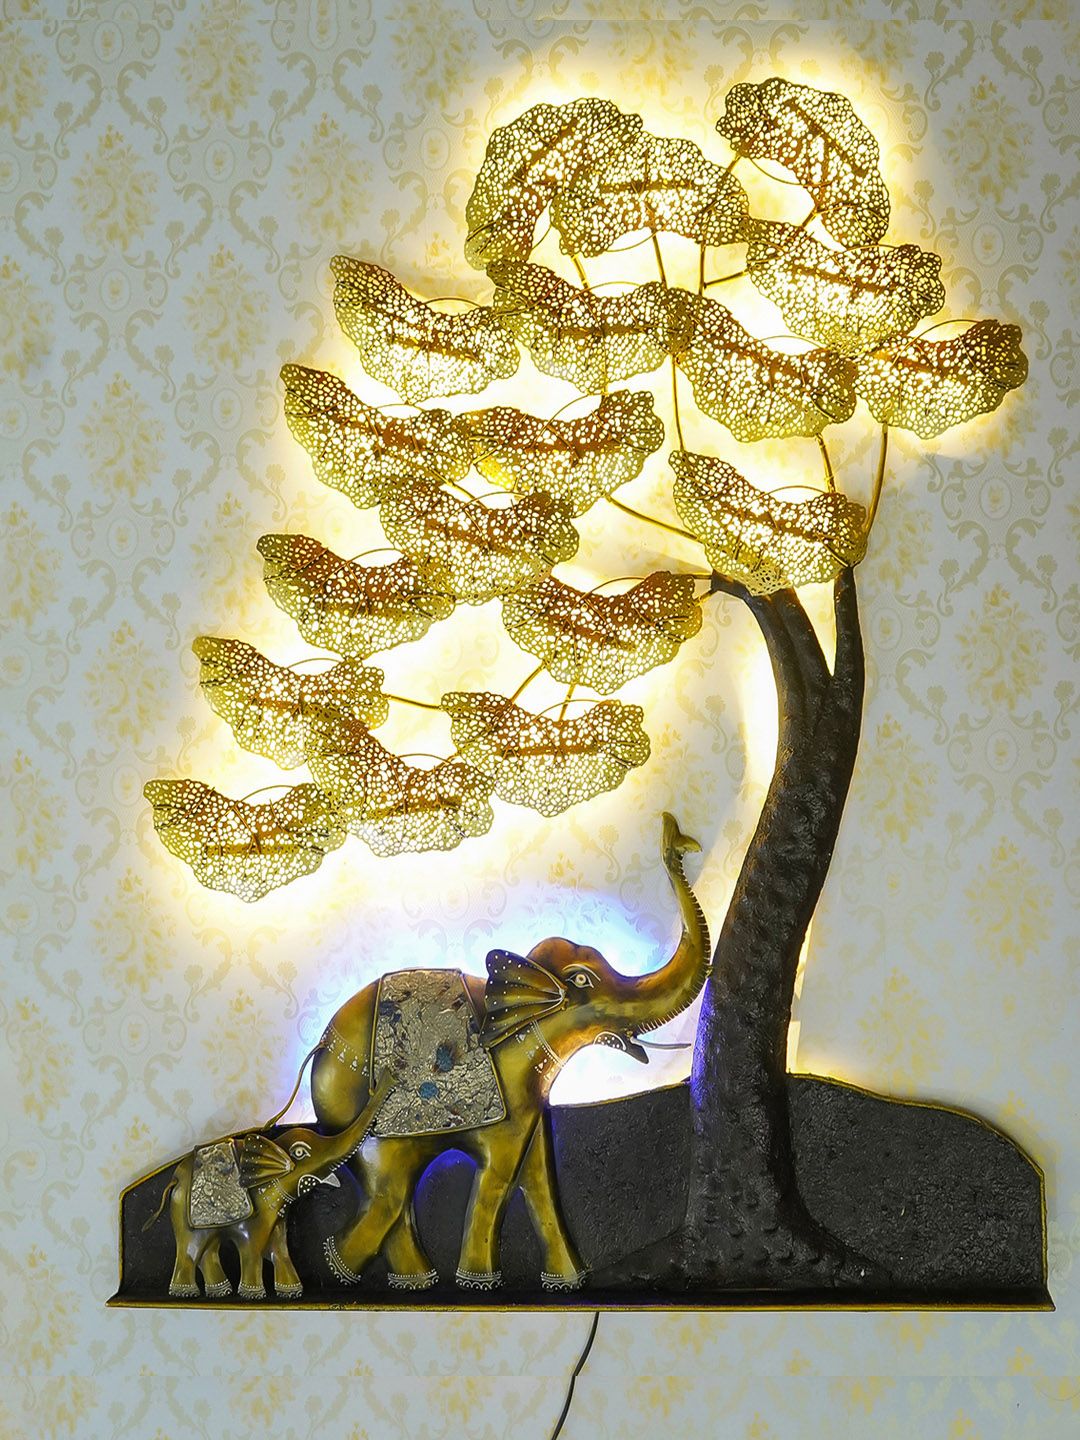 eCraftIndia Gold-Toned & Black Handcrafted Elephant Family Under Golden Leaves Tree Wall Hanging with Background LED's Price in India